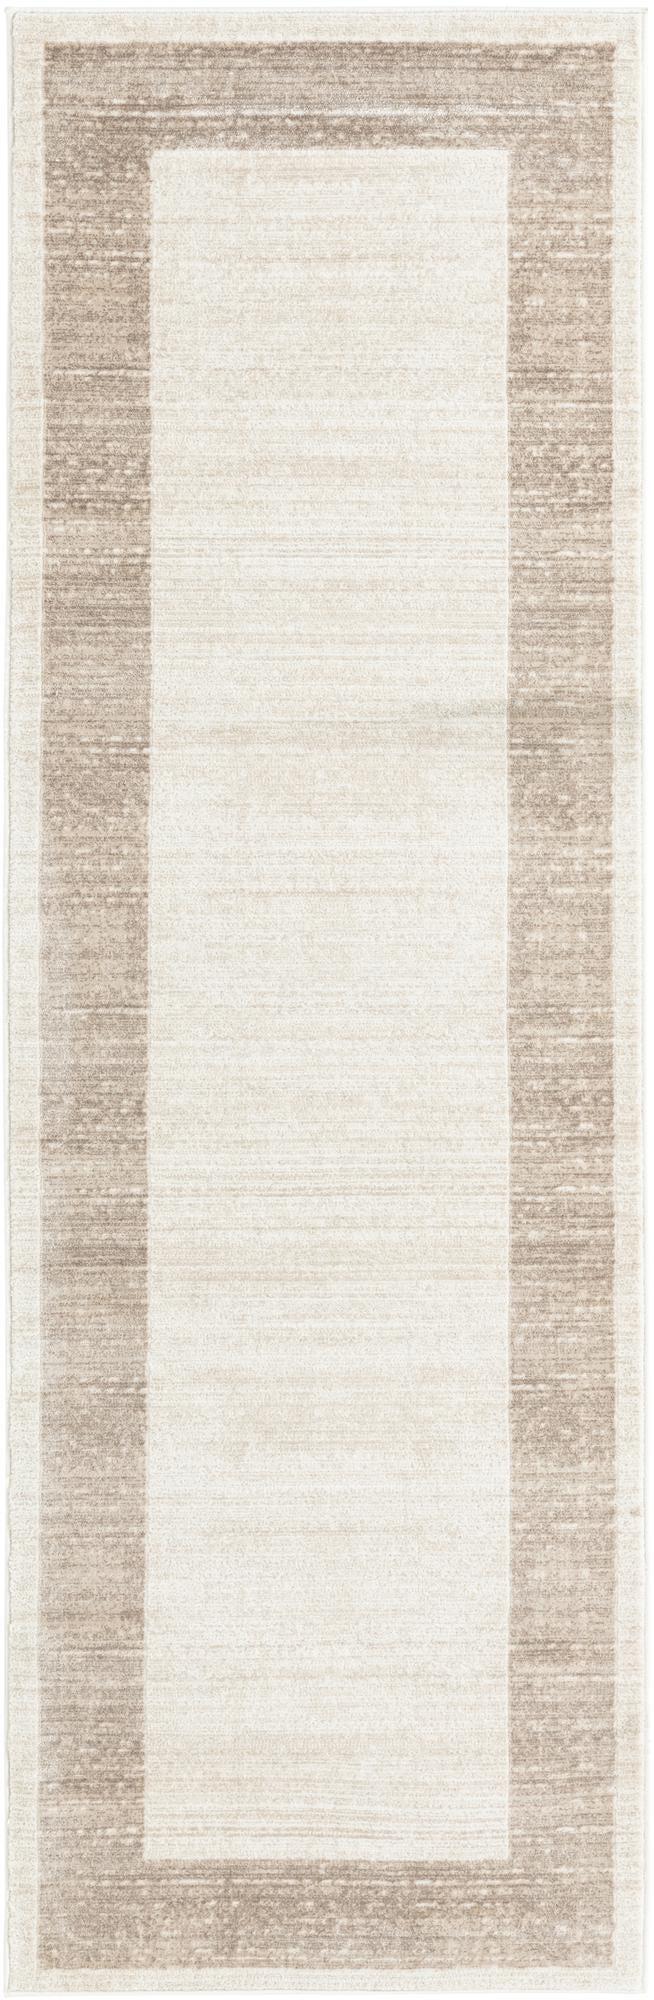 rugpal teydgha traditional area rug collection